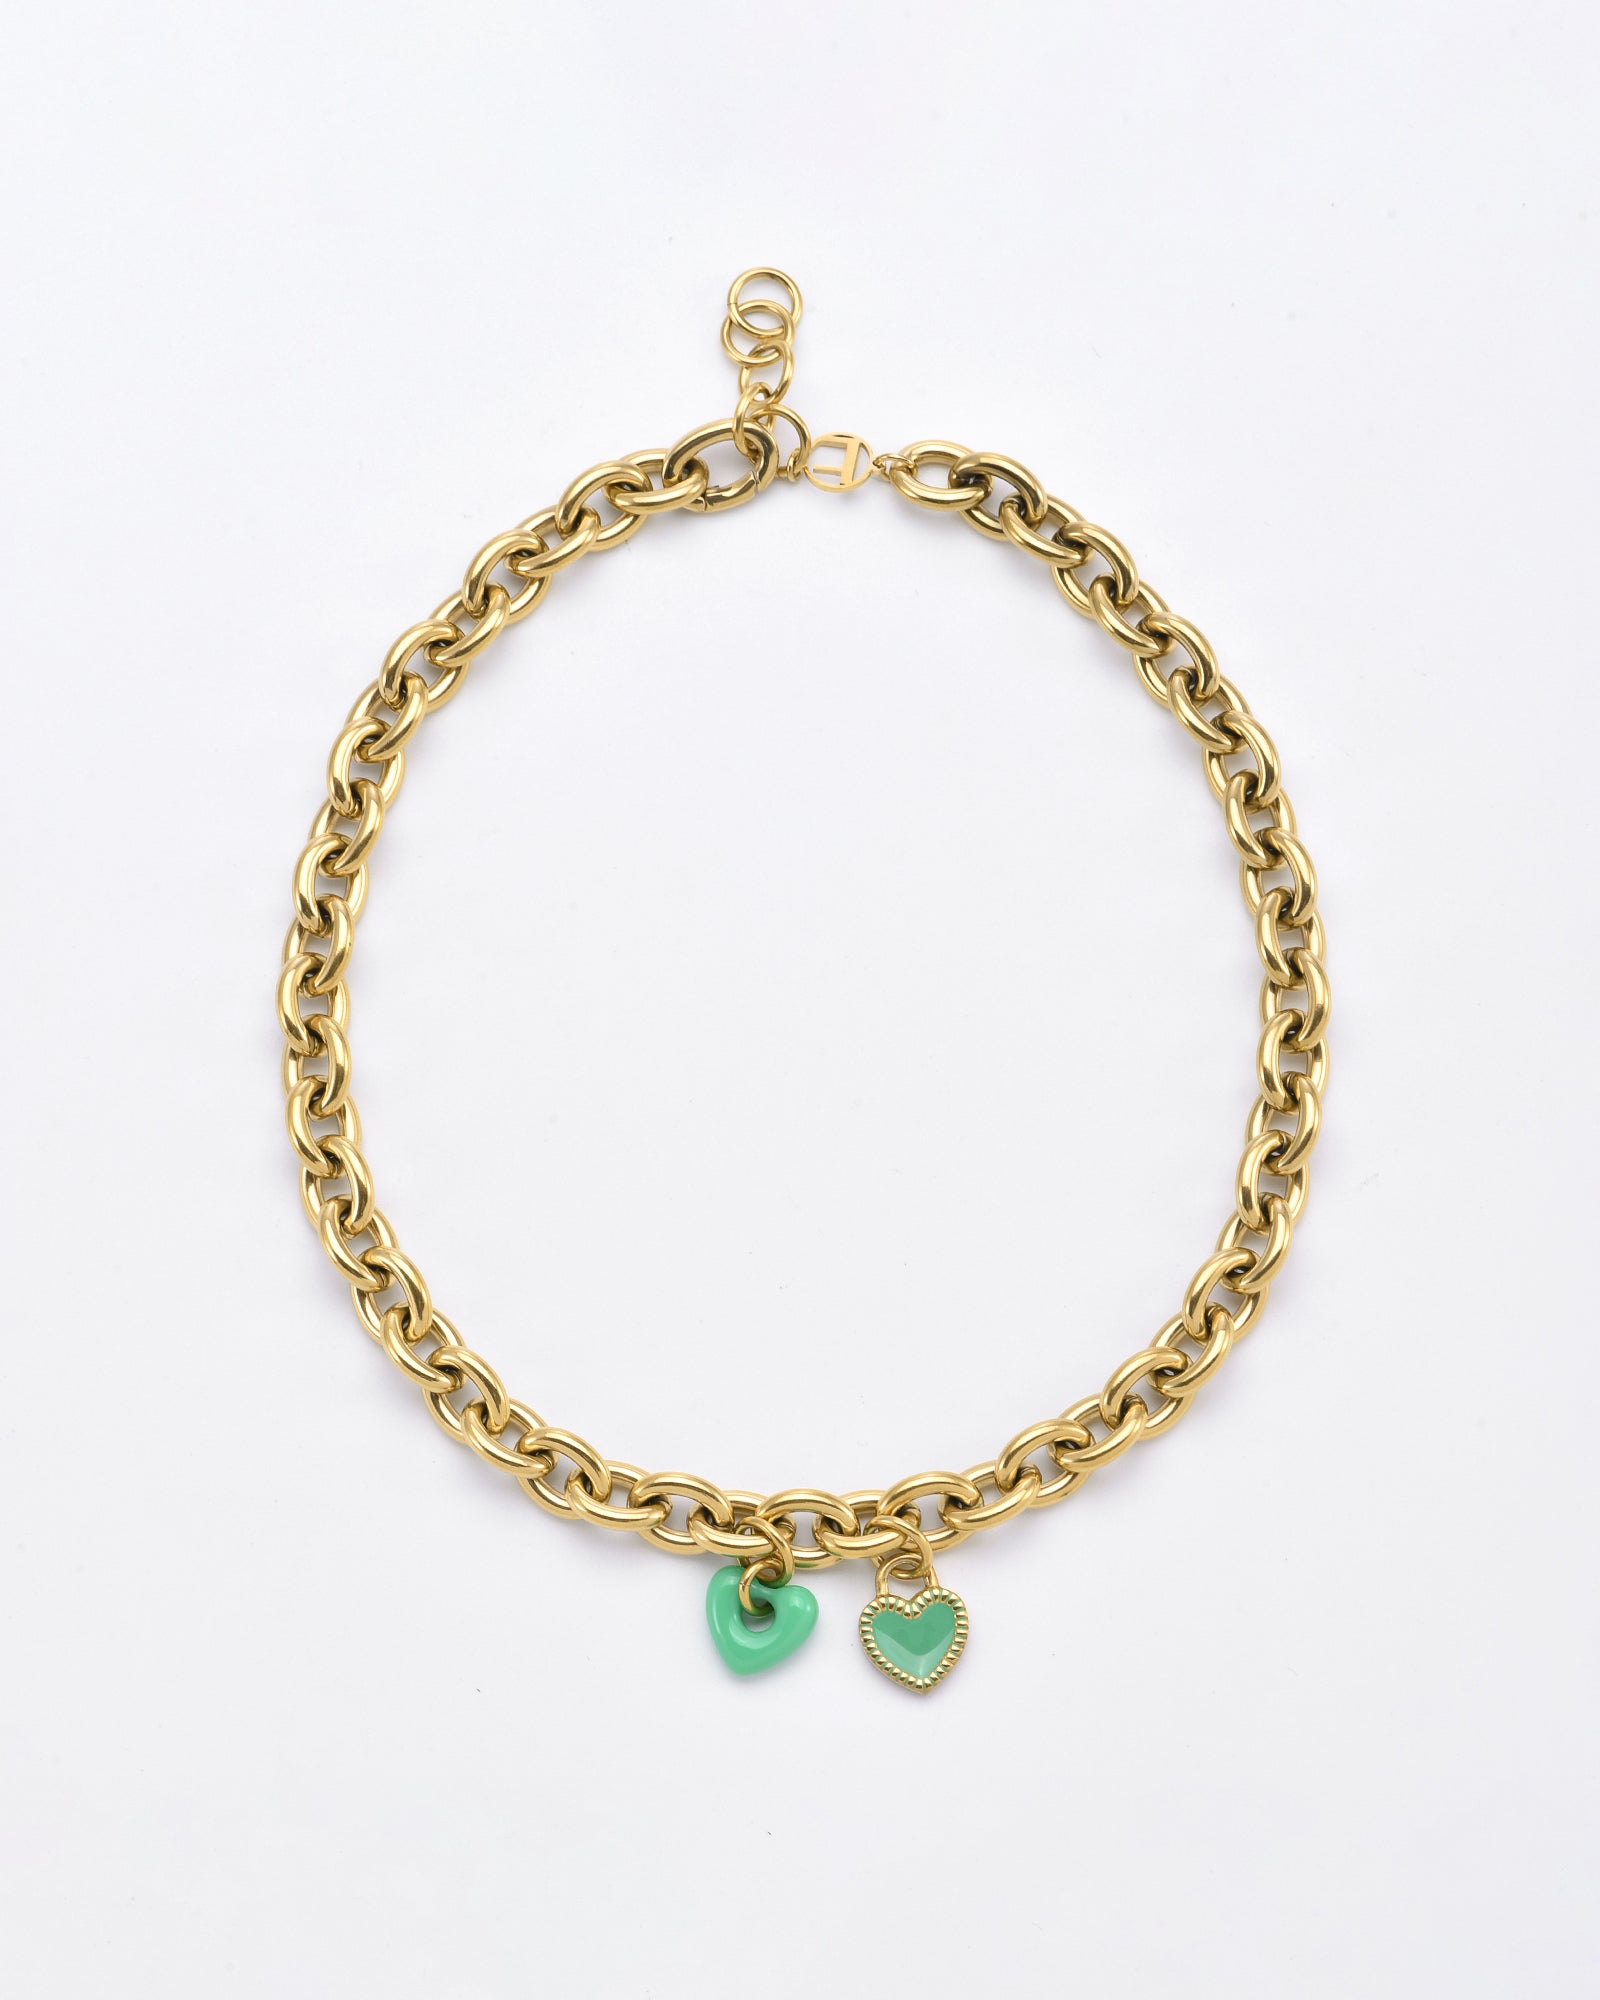 A For Art&#39;s Sake® Double Heart Necklace Gold featuring double hearts; one is a solid green charm and the other is a green outlined heart encrusted with small stones. The necklace has a lobster clasp closure.